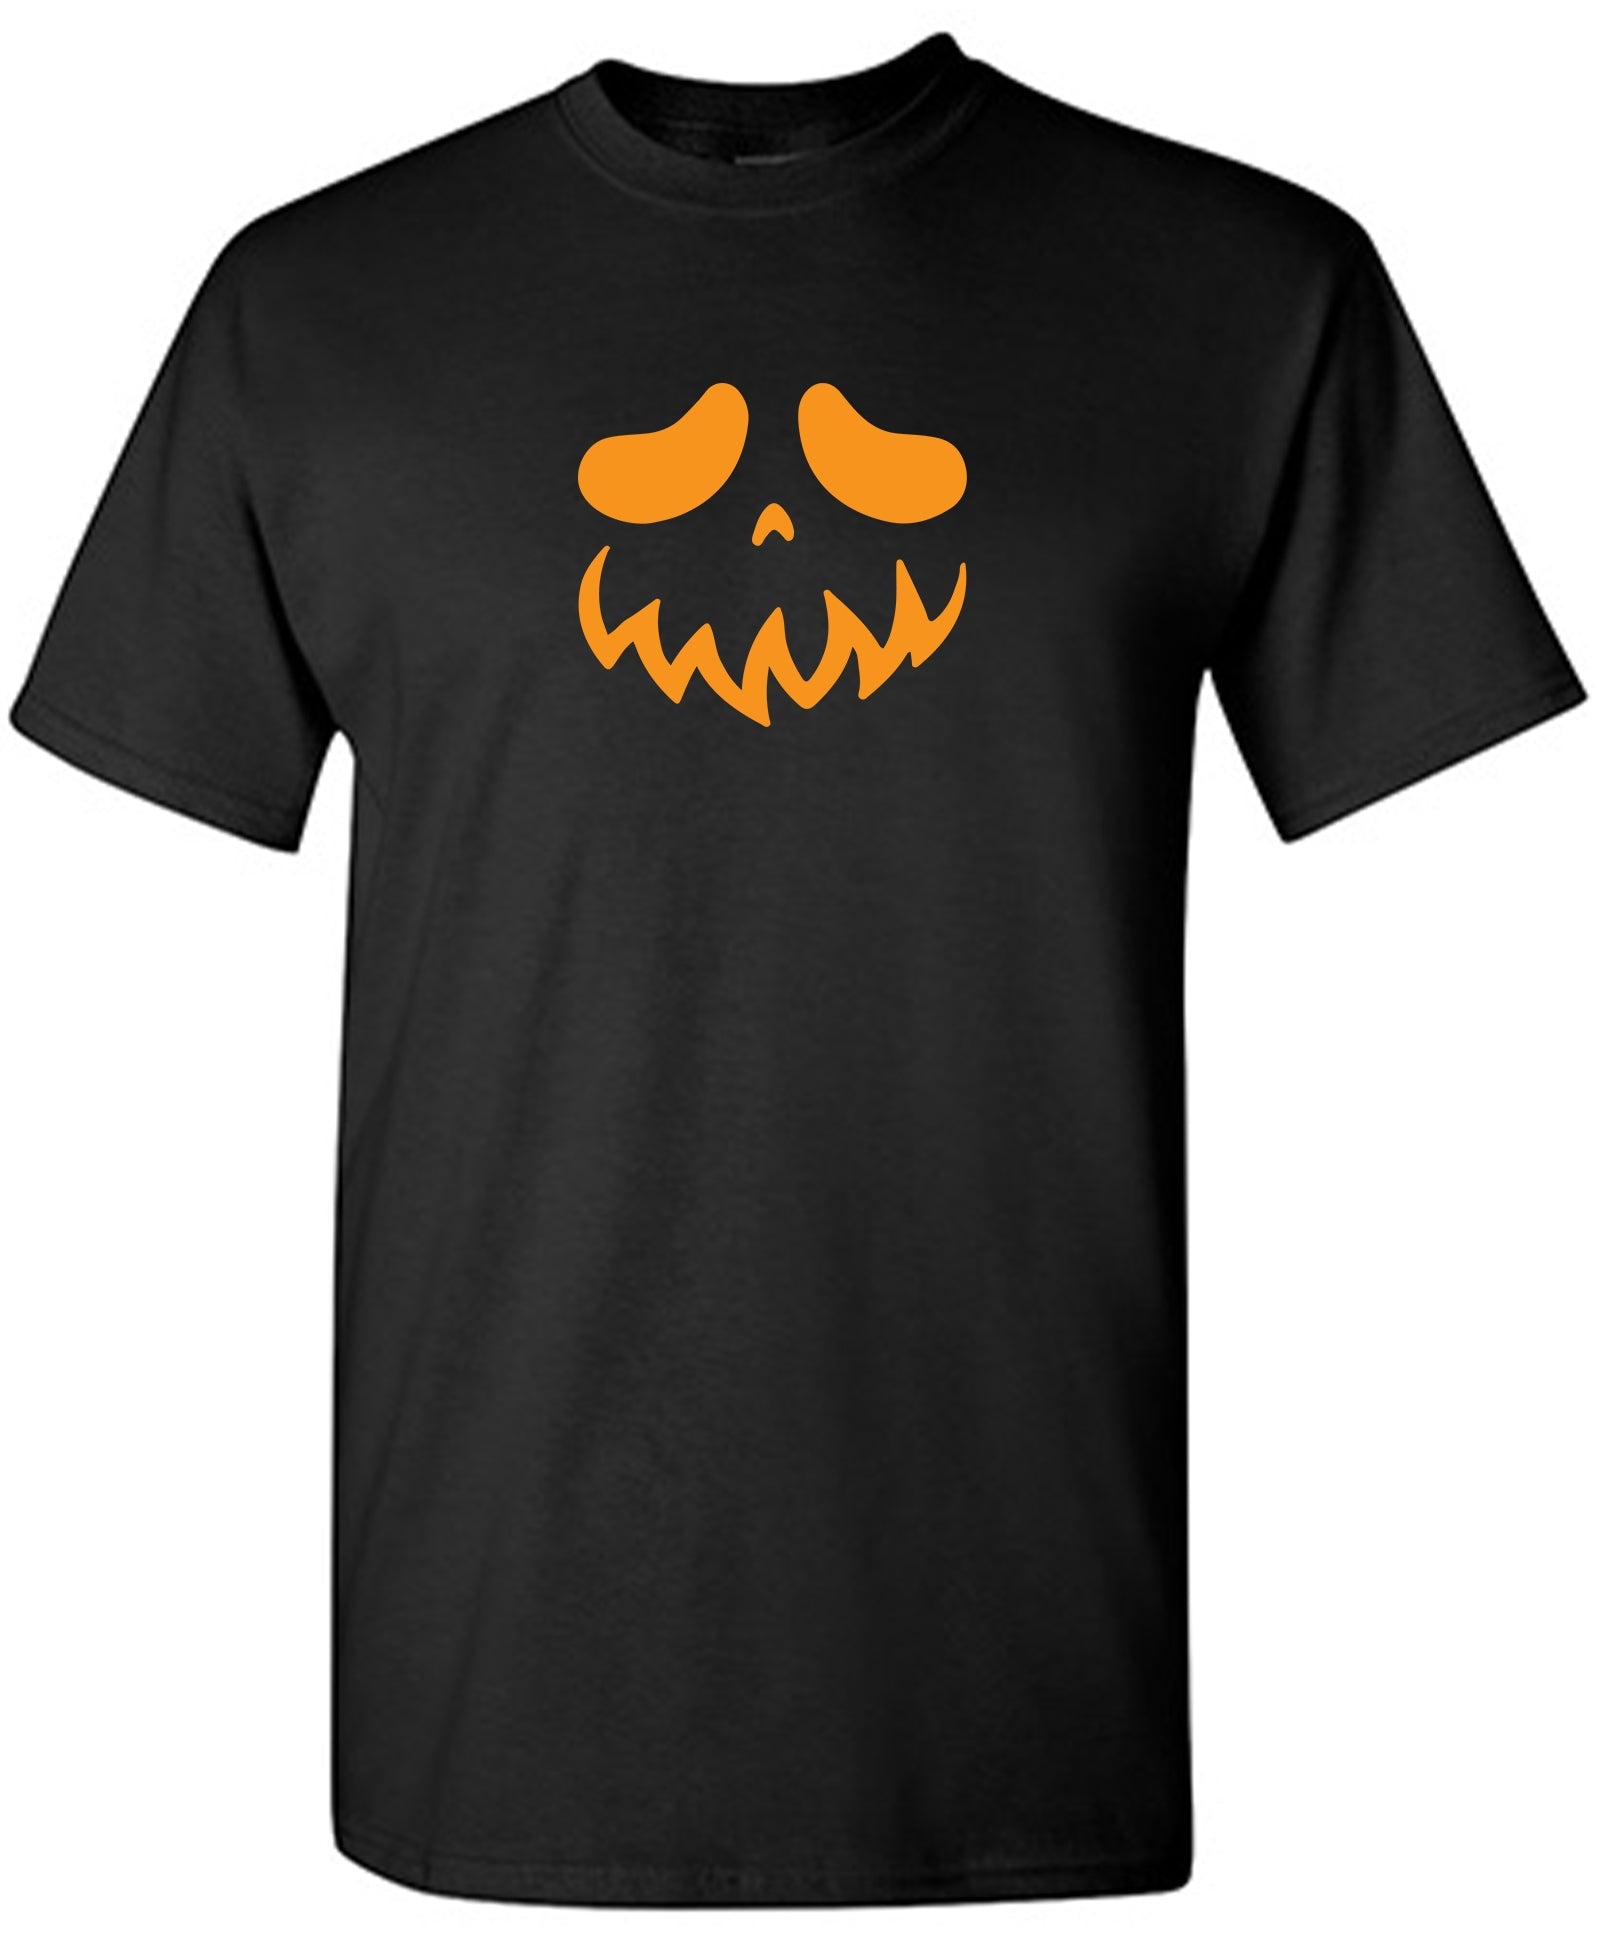 Pumpkin Stupid Face Tee - Funny Graphic T Shirts